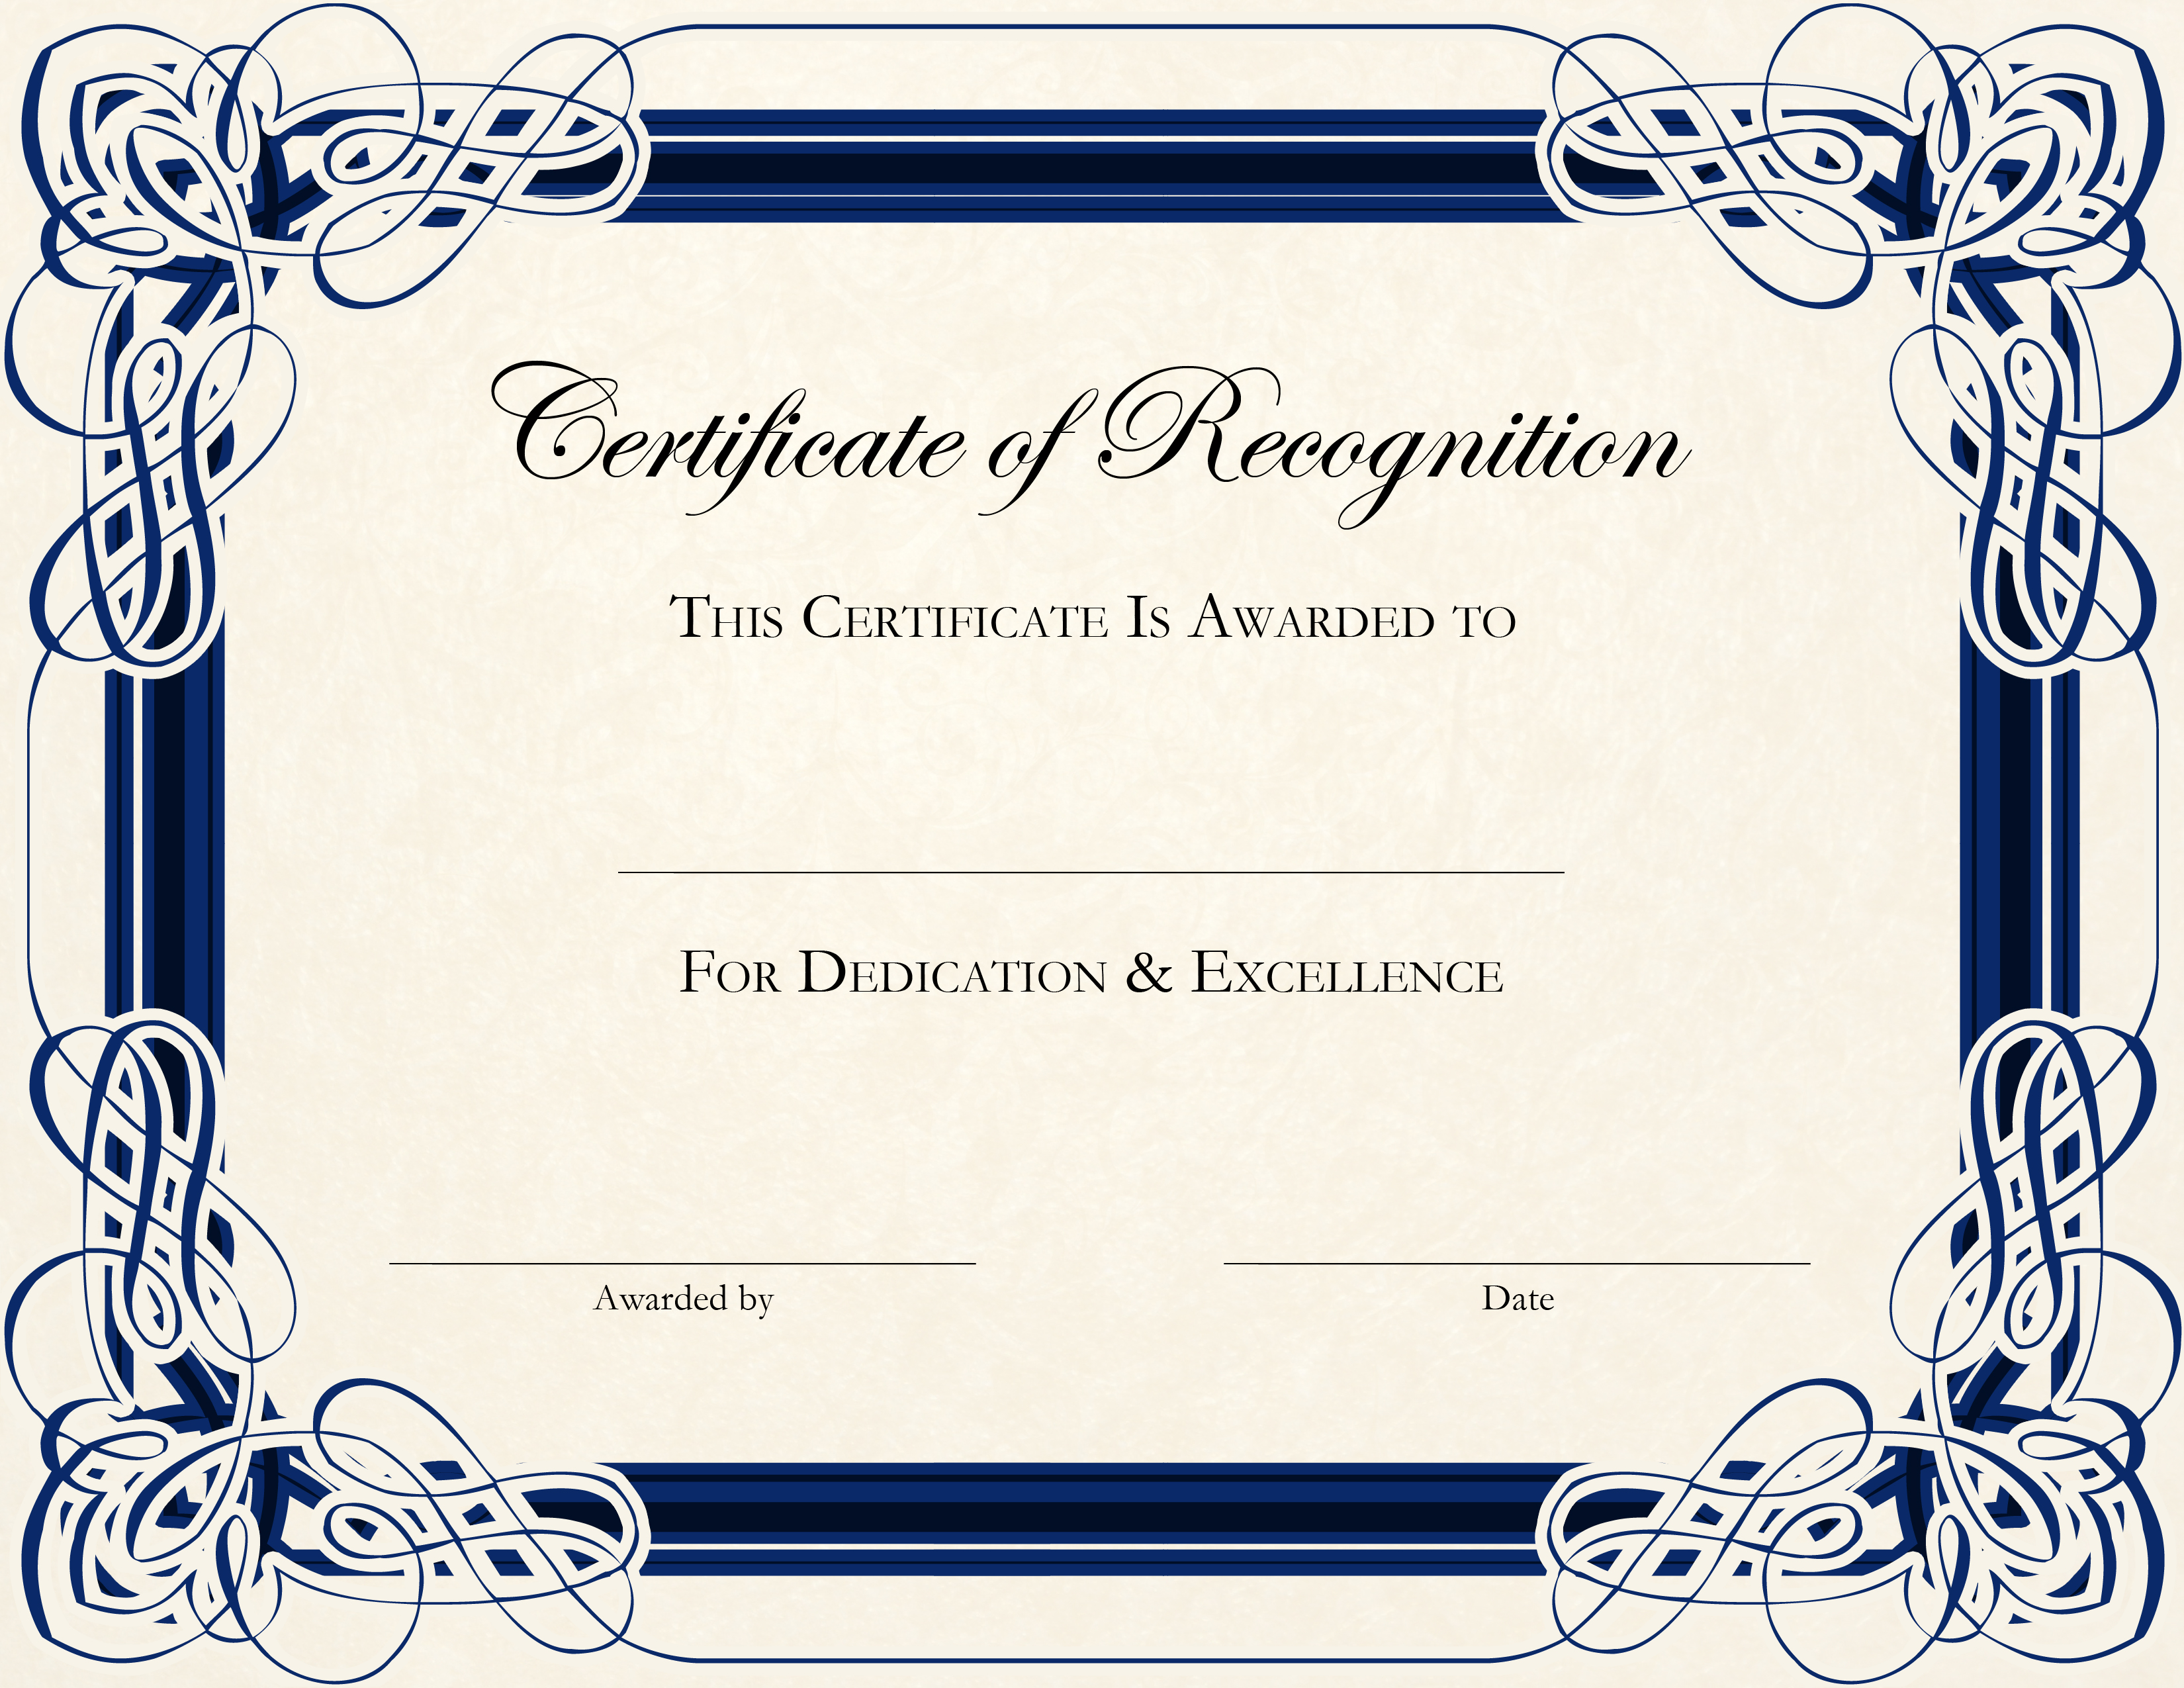 23 Certificate Design Templates Images - Recognition Certificate Intended For Certificate Templates For Word Free Downloads